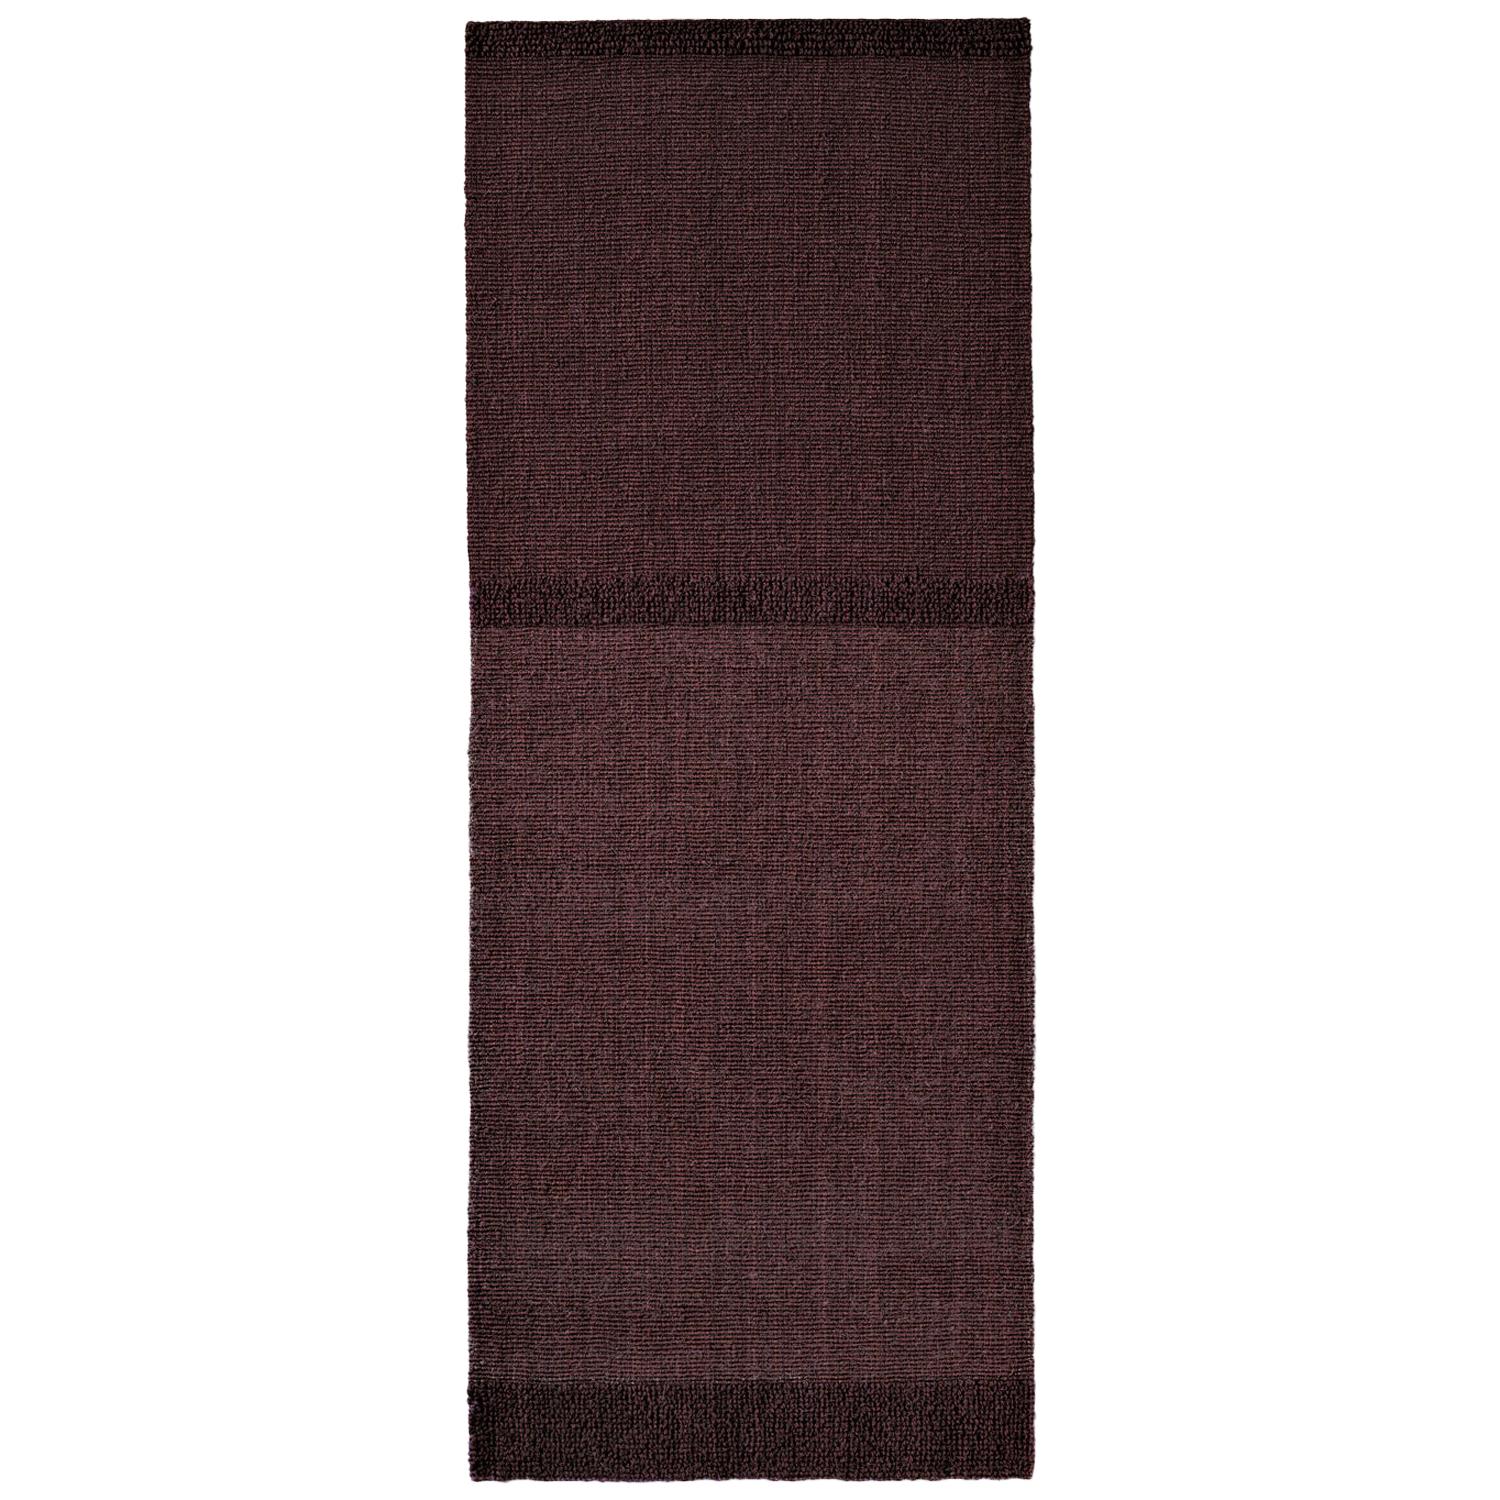 Nature Inspired Spring Coconut Brown Rug by Deanna Comellini In Stock 123x323 cm